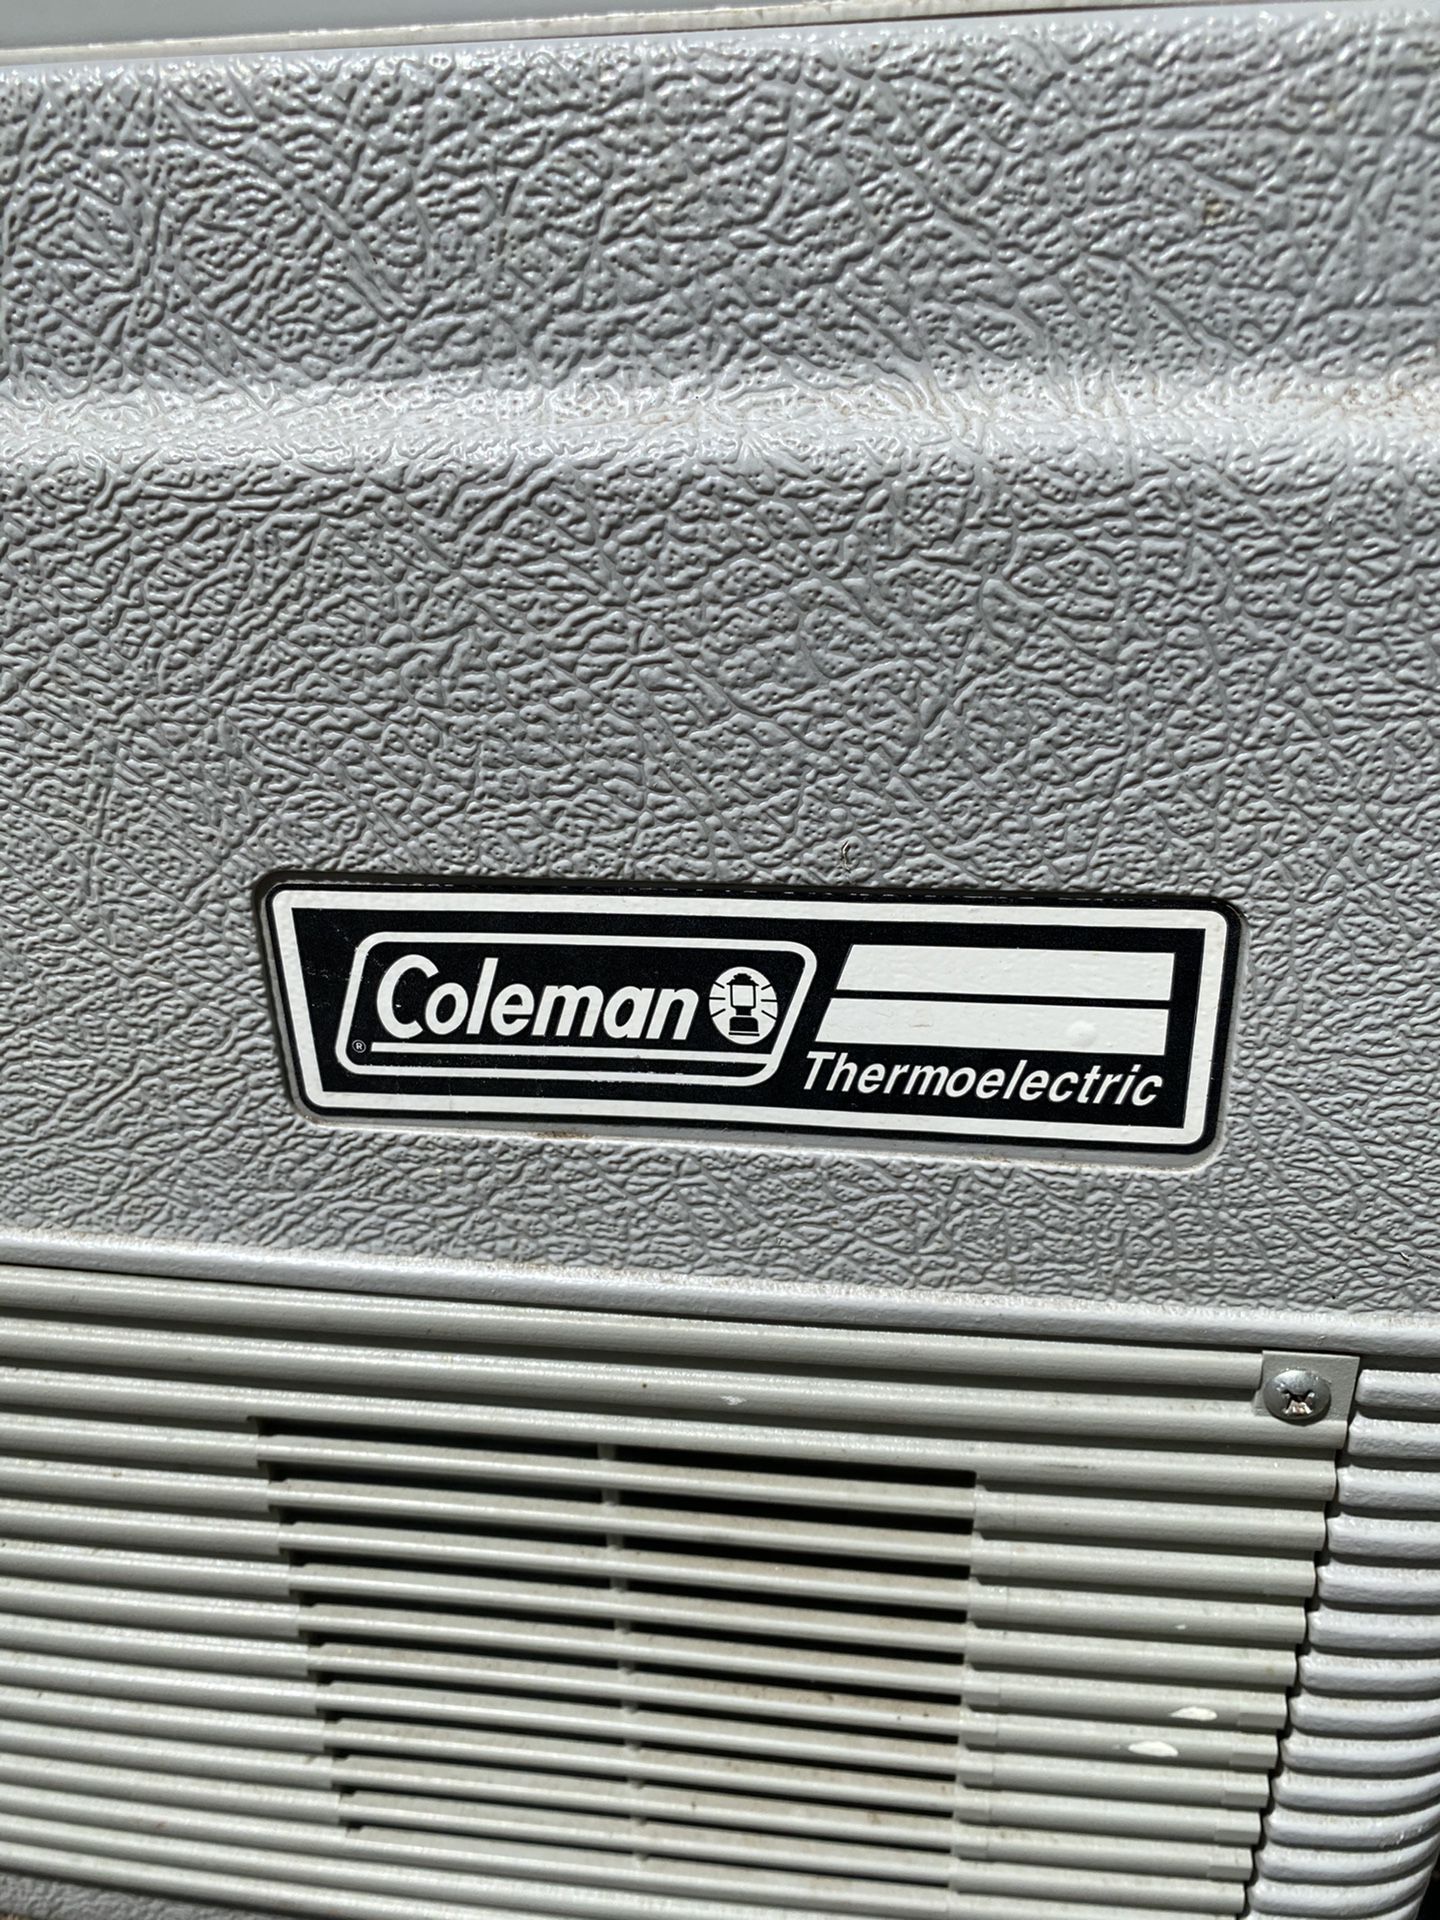 Vintage Coleman ThermoElectric car Cooler 